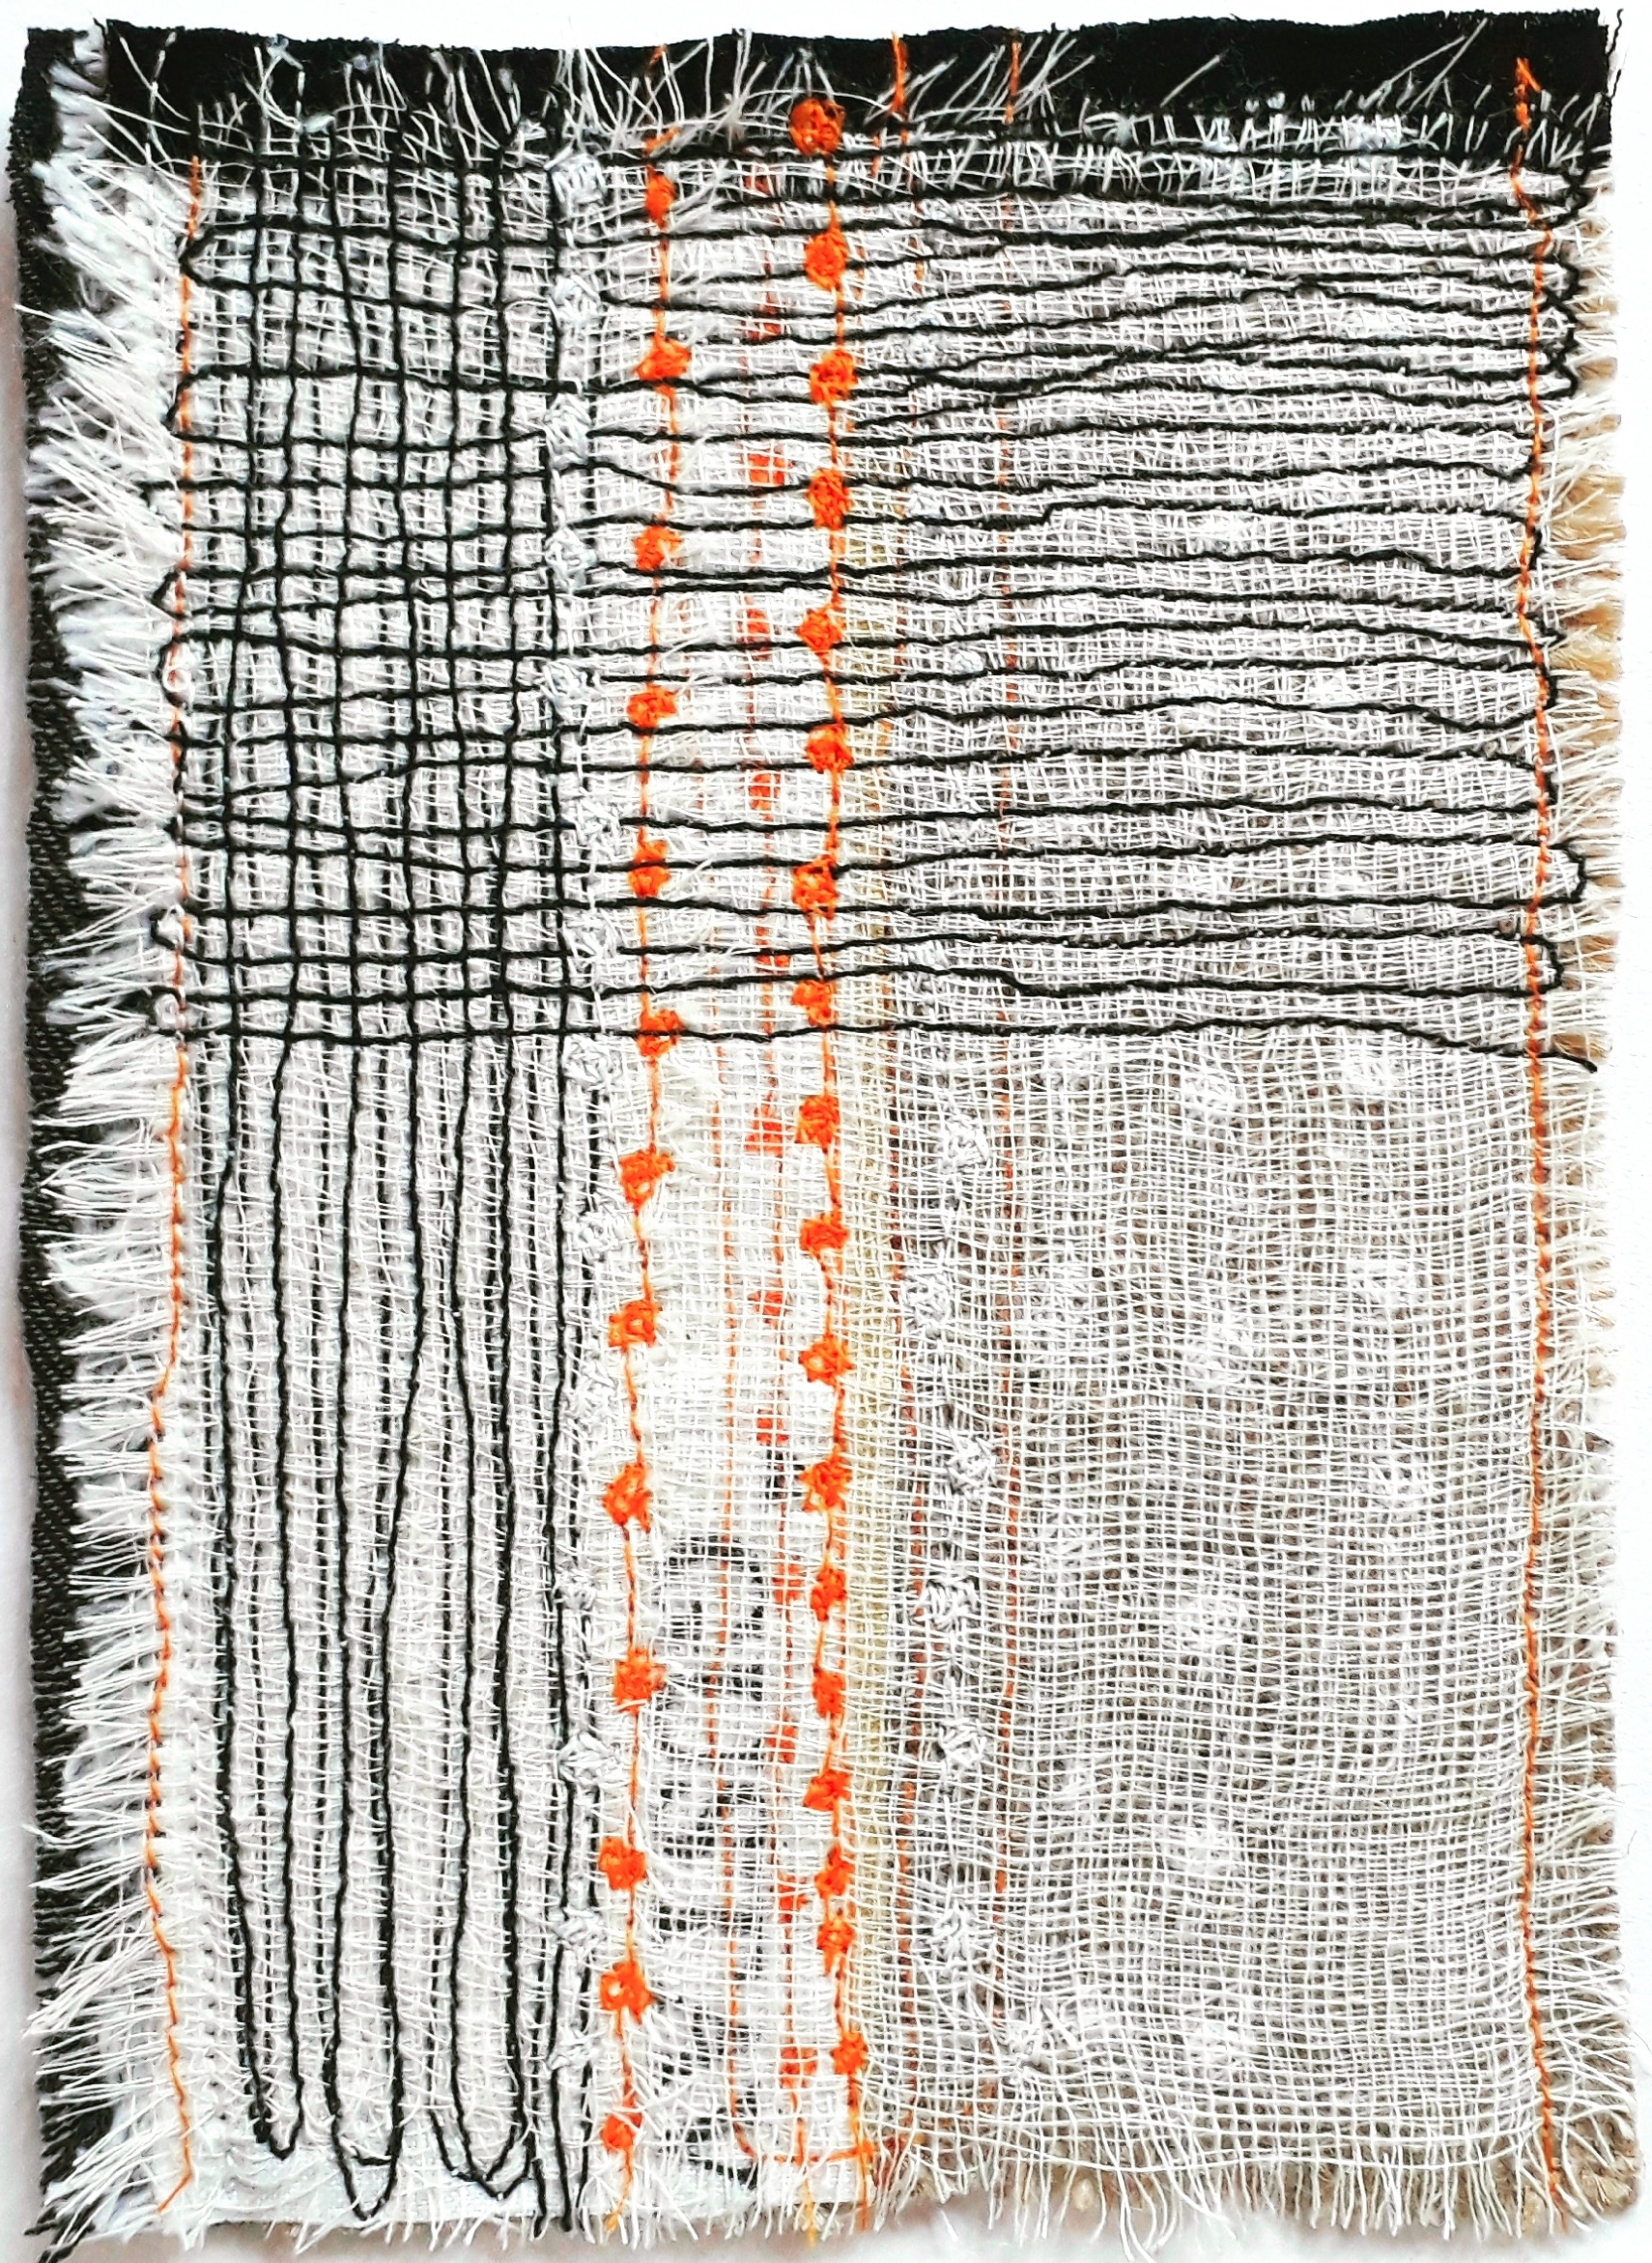 Oeuvre textile - Patricia Kelly